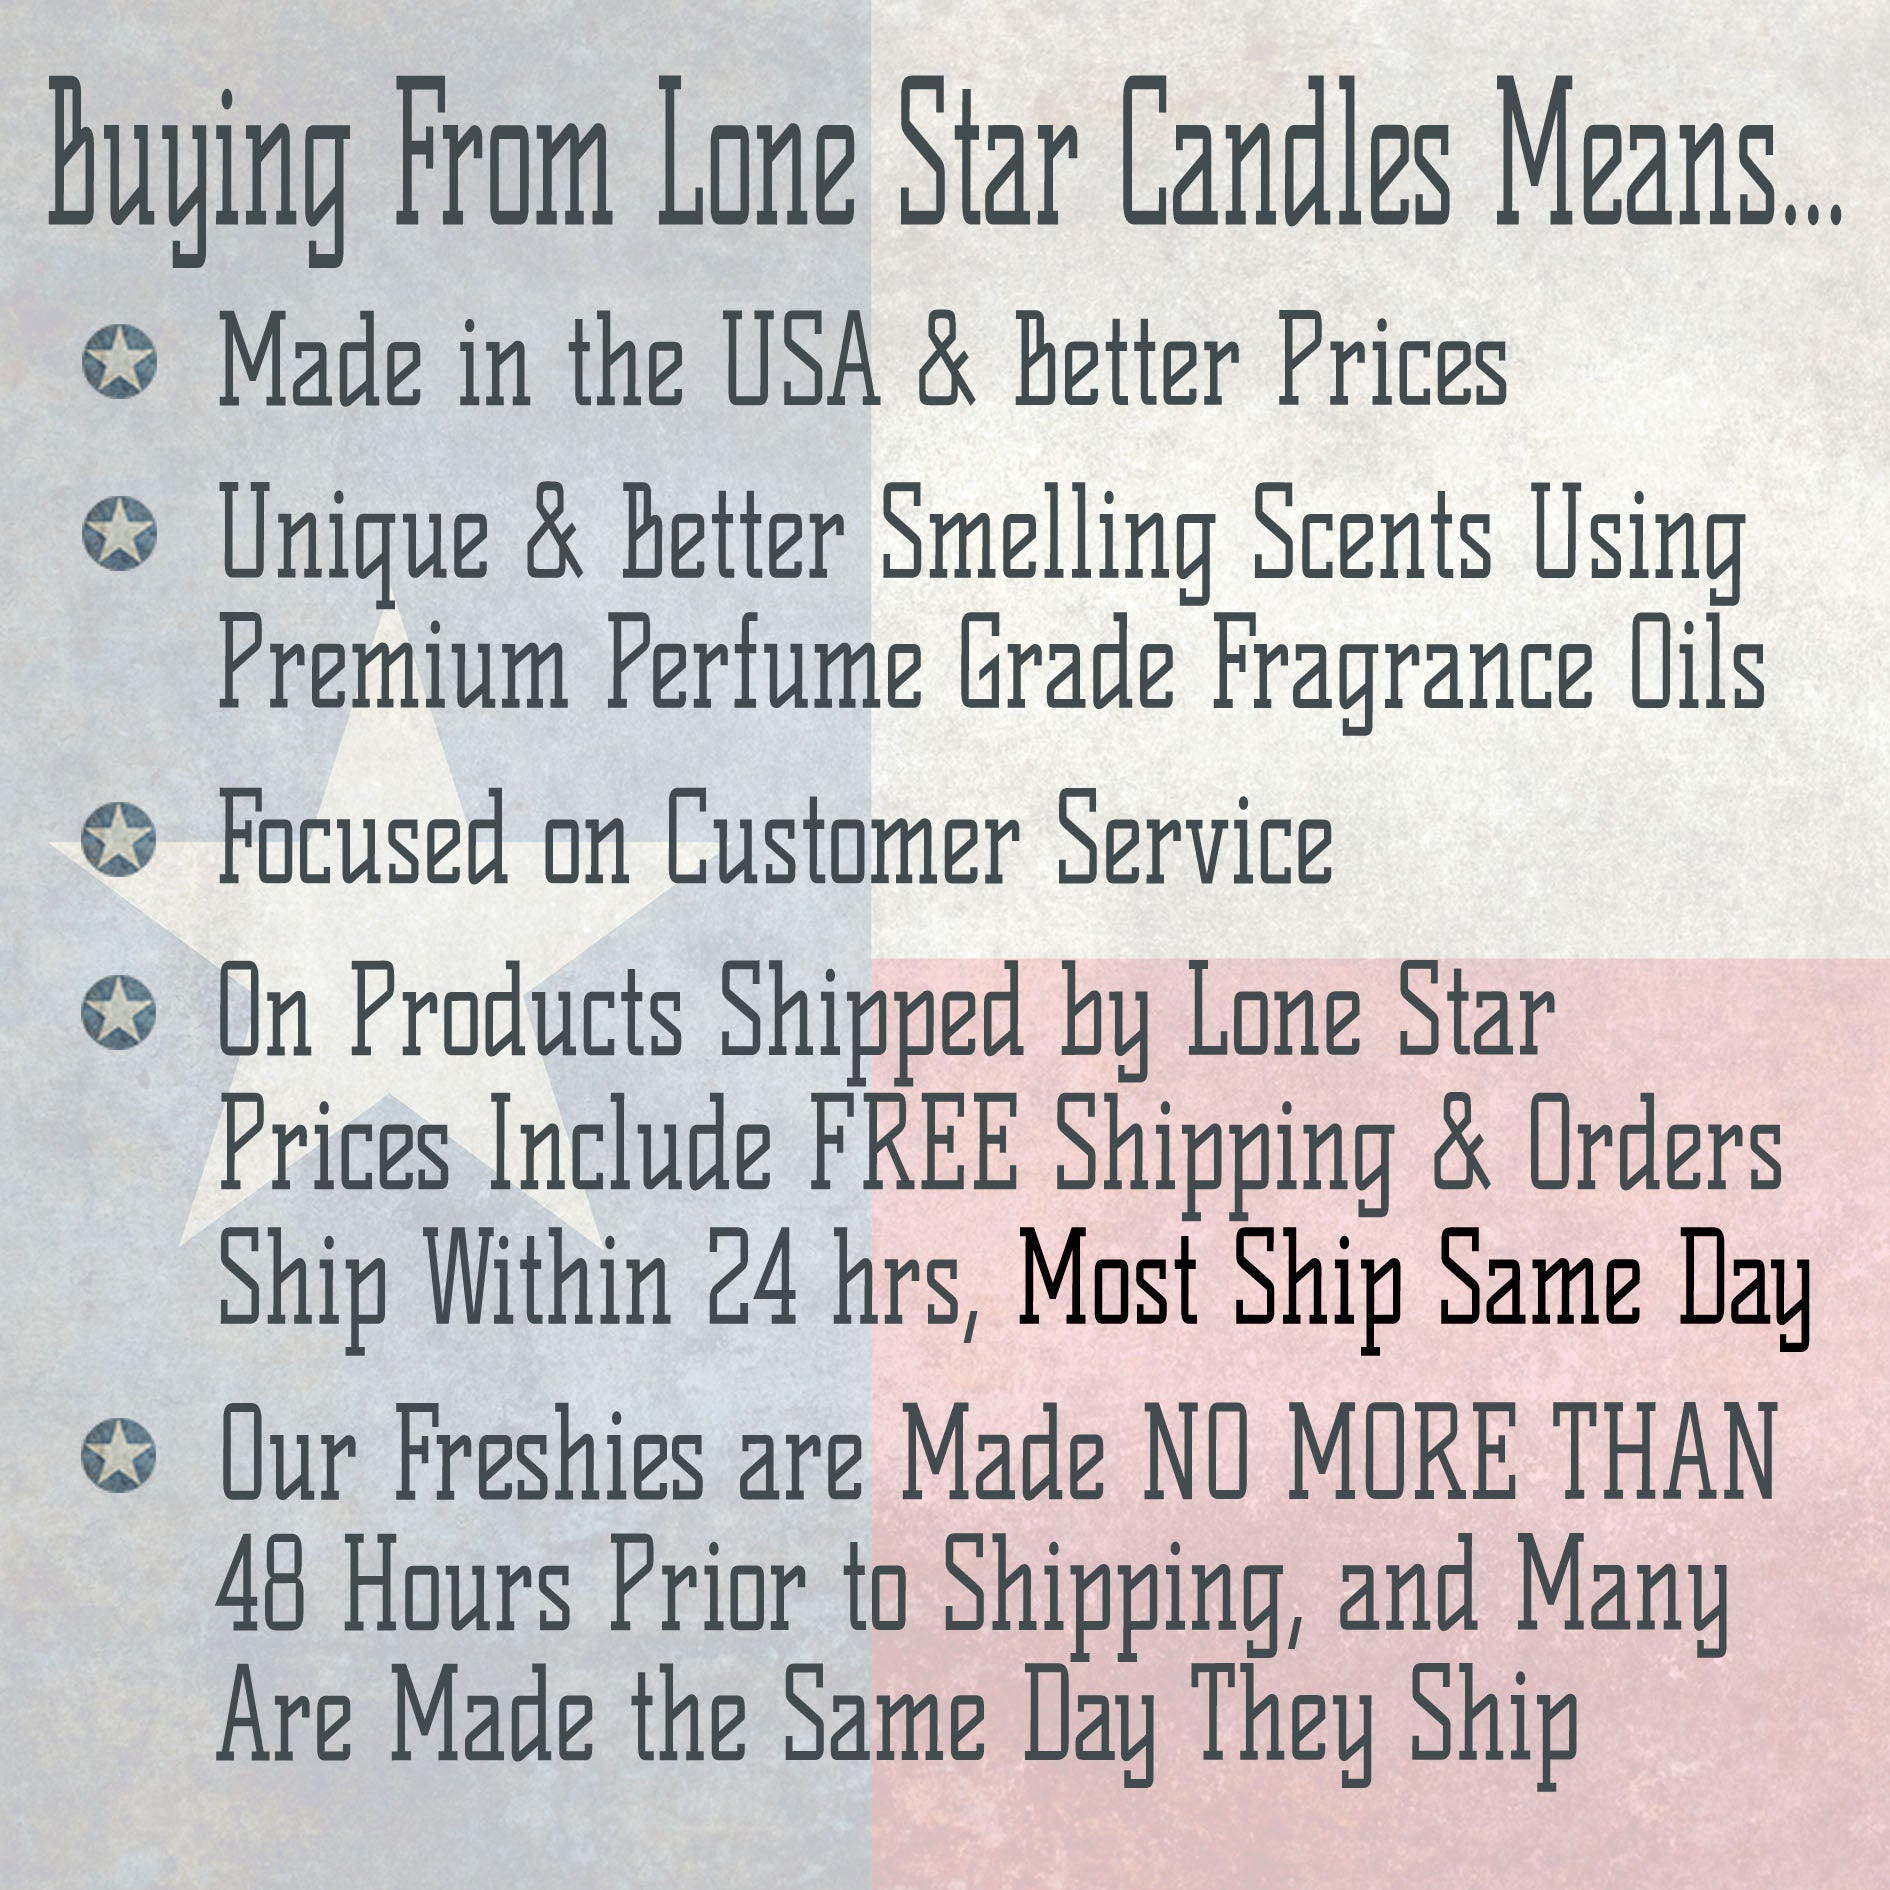 Cranberries & Sandalwood, Lone Star Candles & More's Premium Strongly Scented Freshies, A Delightful Mix of Spiced Cranberry, & Sandalwood, Car & Air Freshener, USA Made in Texas, Elephant 1-Pack